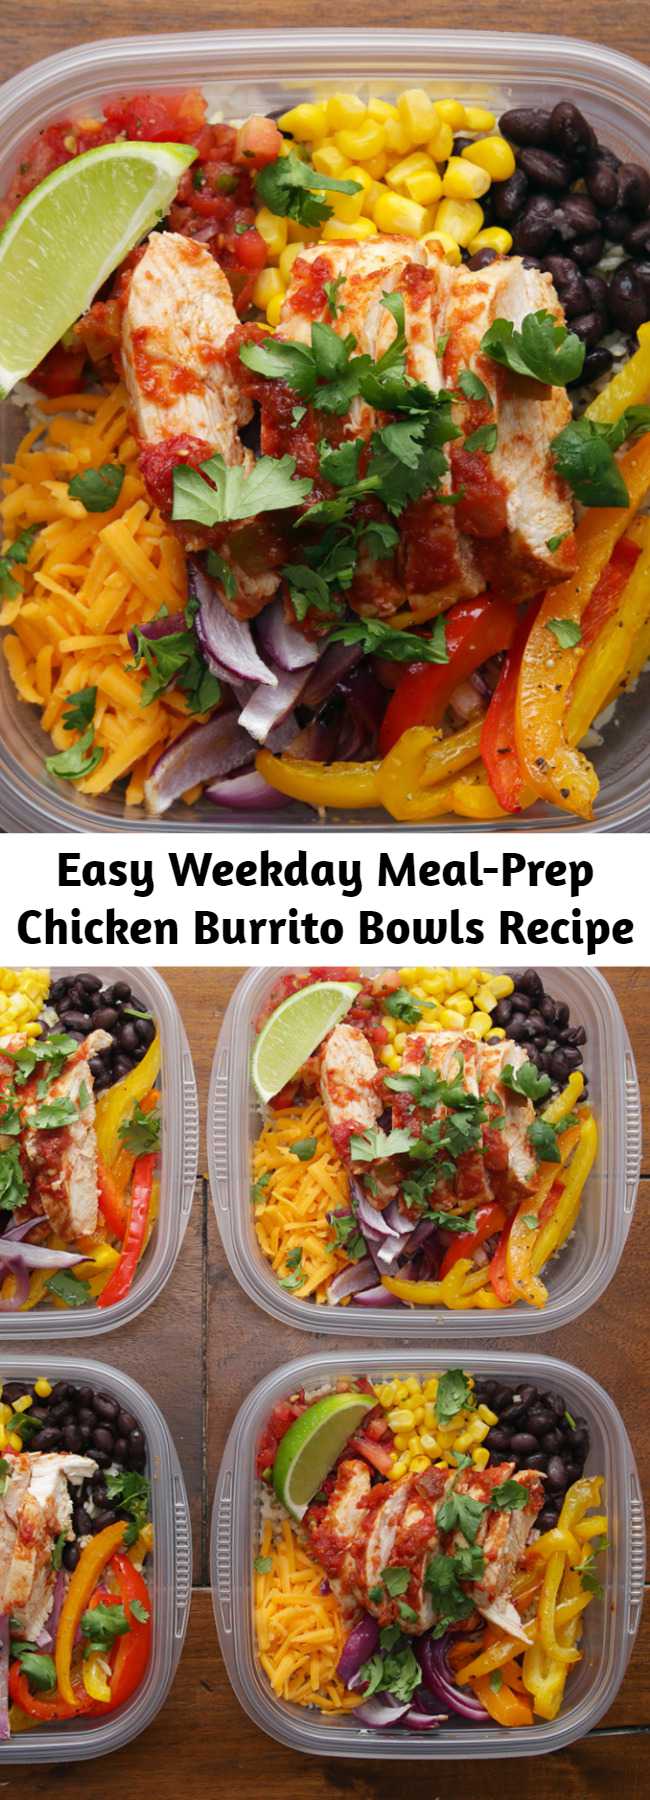 Easy Weekday Meal-Prep Chicken Burrito Bowls Recipe - Make these chicken burrito lunch bowls for healthy lunches through the week!